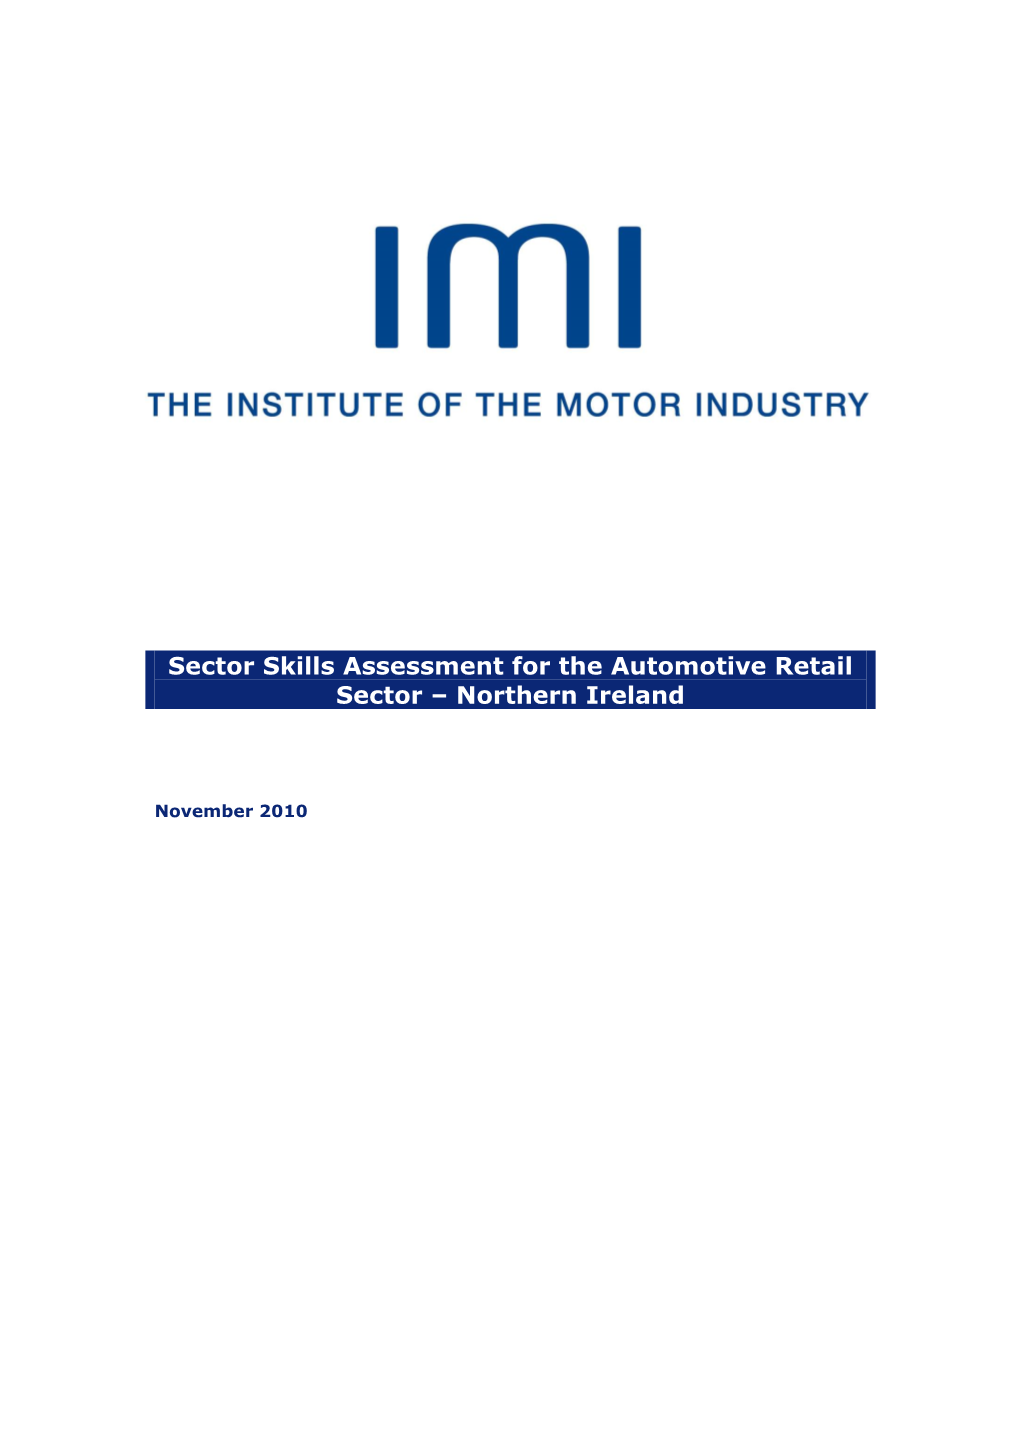 Sector Skills Assessment for the Automotive Retail Sector – Northern Ireland